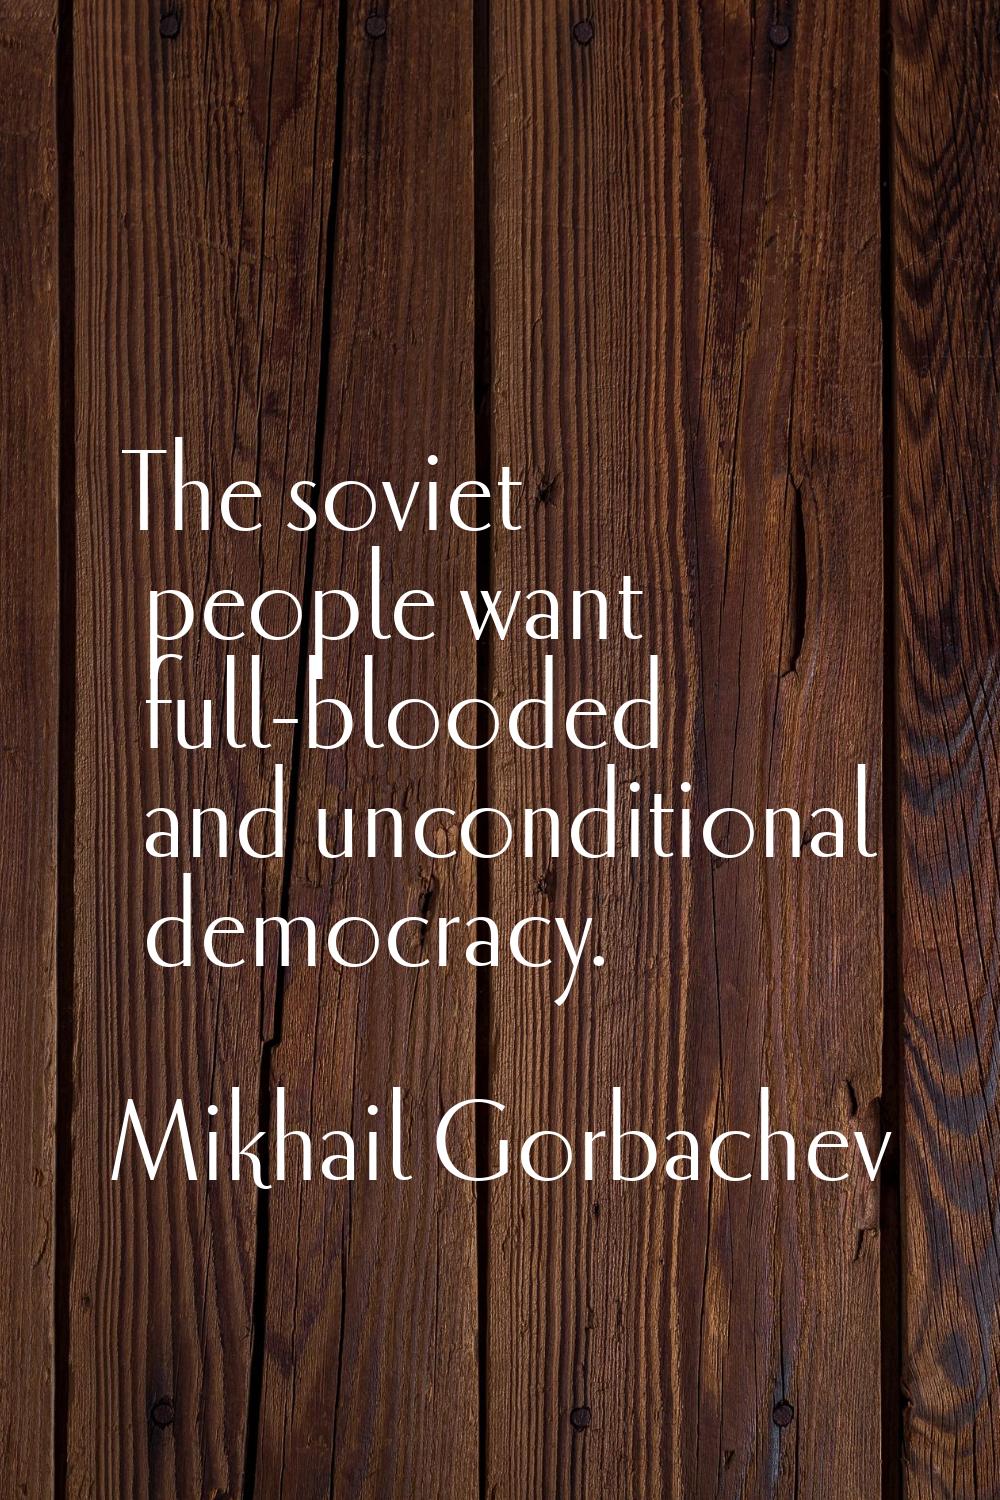 The soviet people want full-blooded and unconditional democracy.